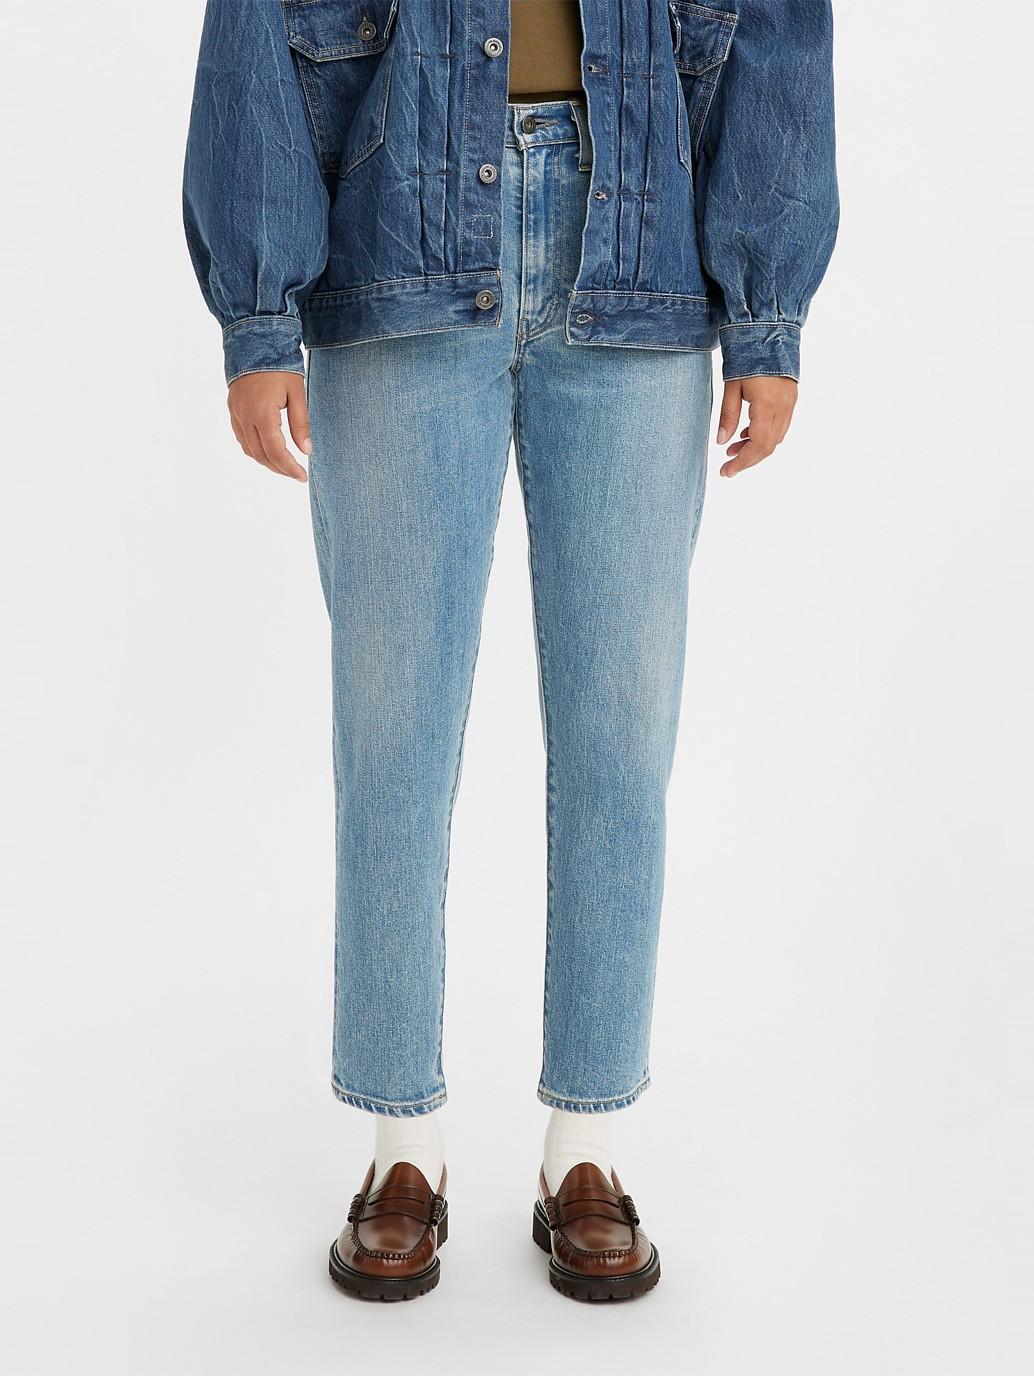 Buy Made & Crafted® Women`s Boyfriend Jeans | Levi's® Official Online Store TH